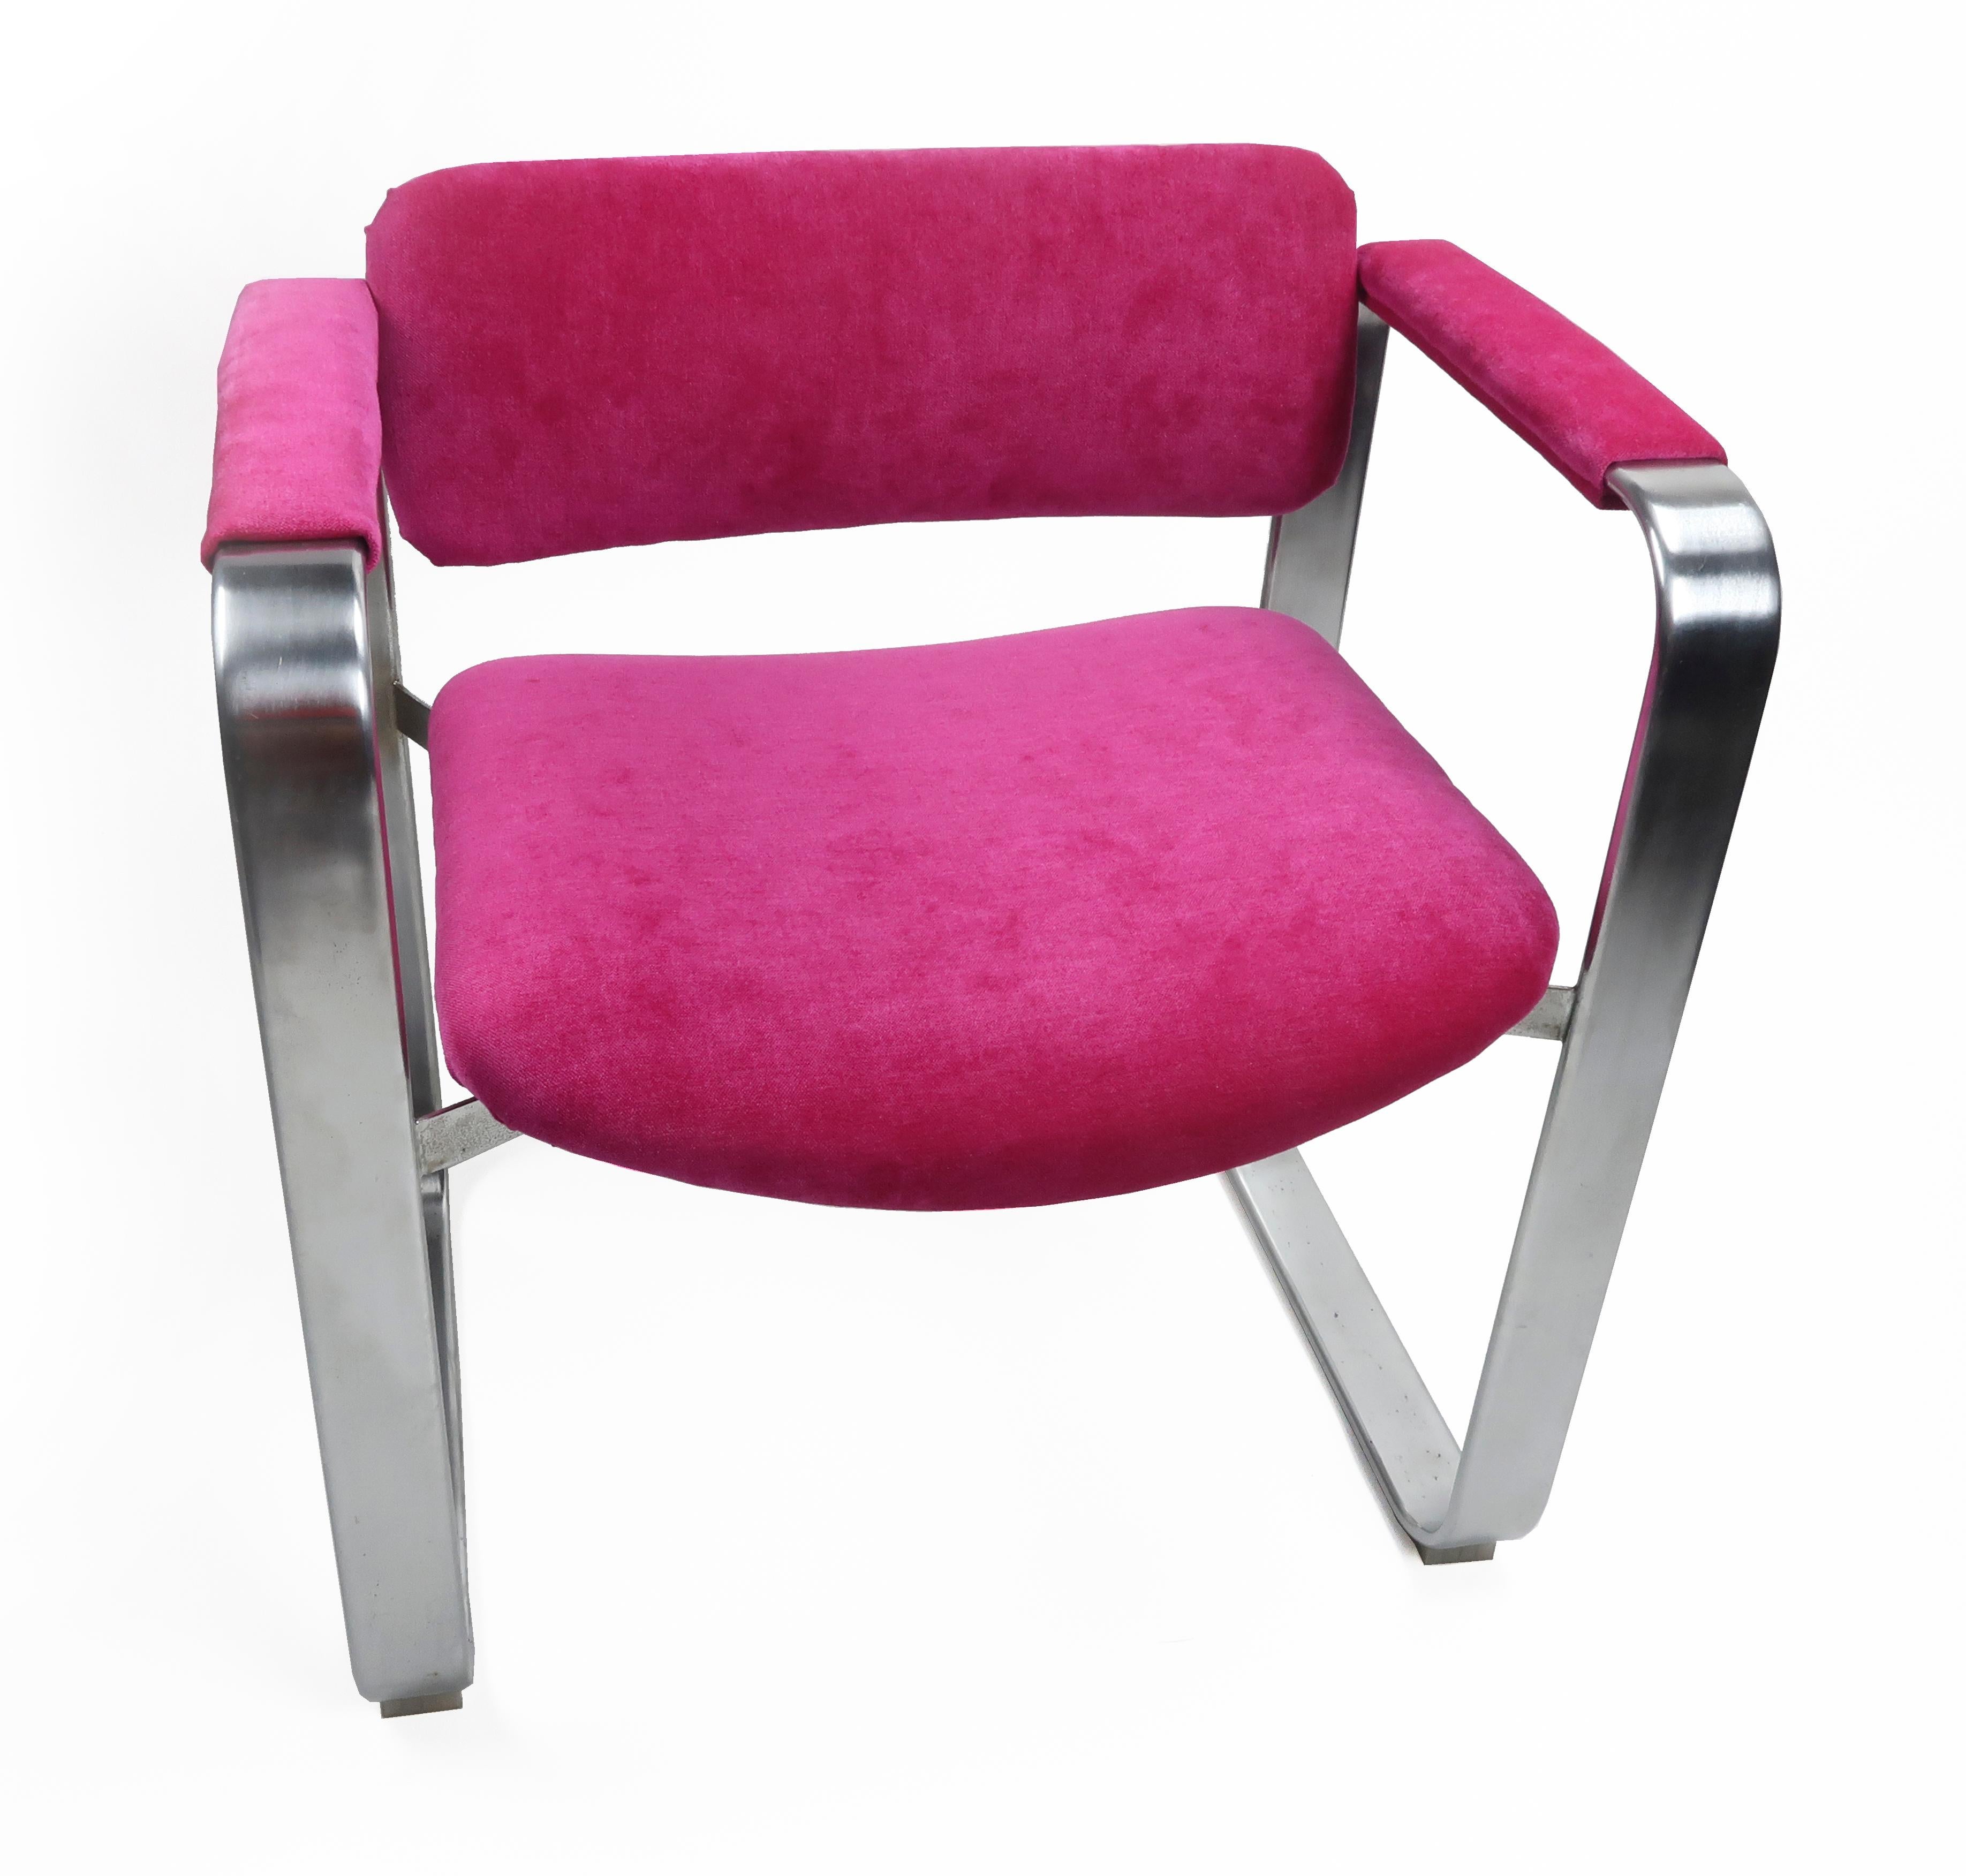 A dazzling Scandinavian Modern executive armchair by famed Finnish designer Eero Aarnio for Mobel Italia (1968). The frame has a satin chrome finish with a stainless back. And new hot pink/fucshia chenille upholstery on the seat, back and